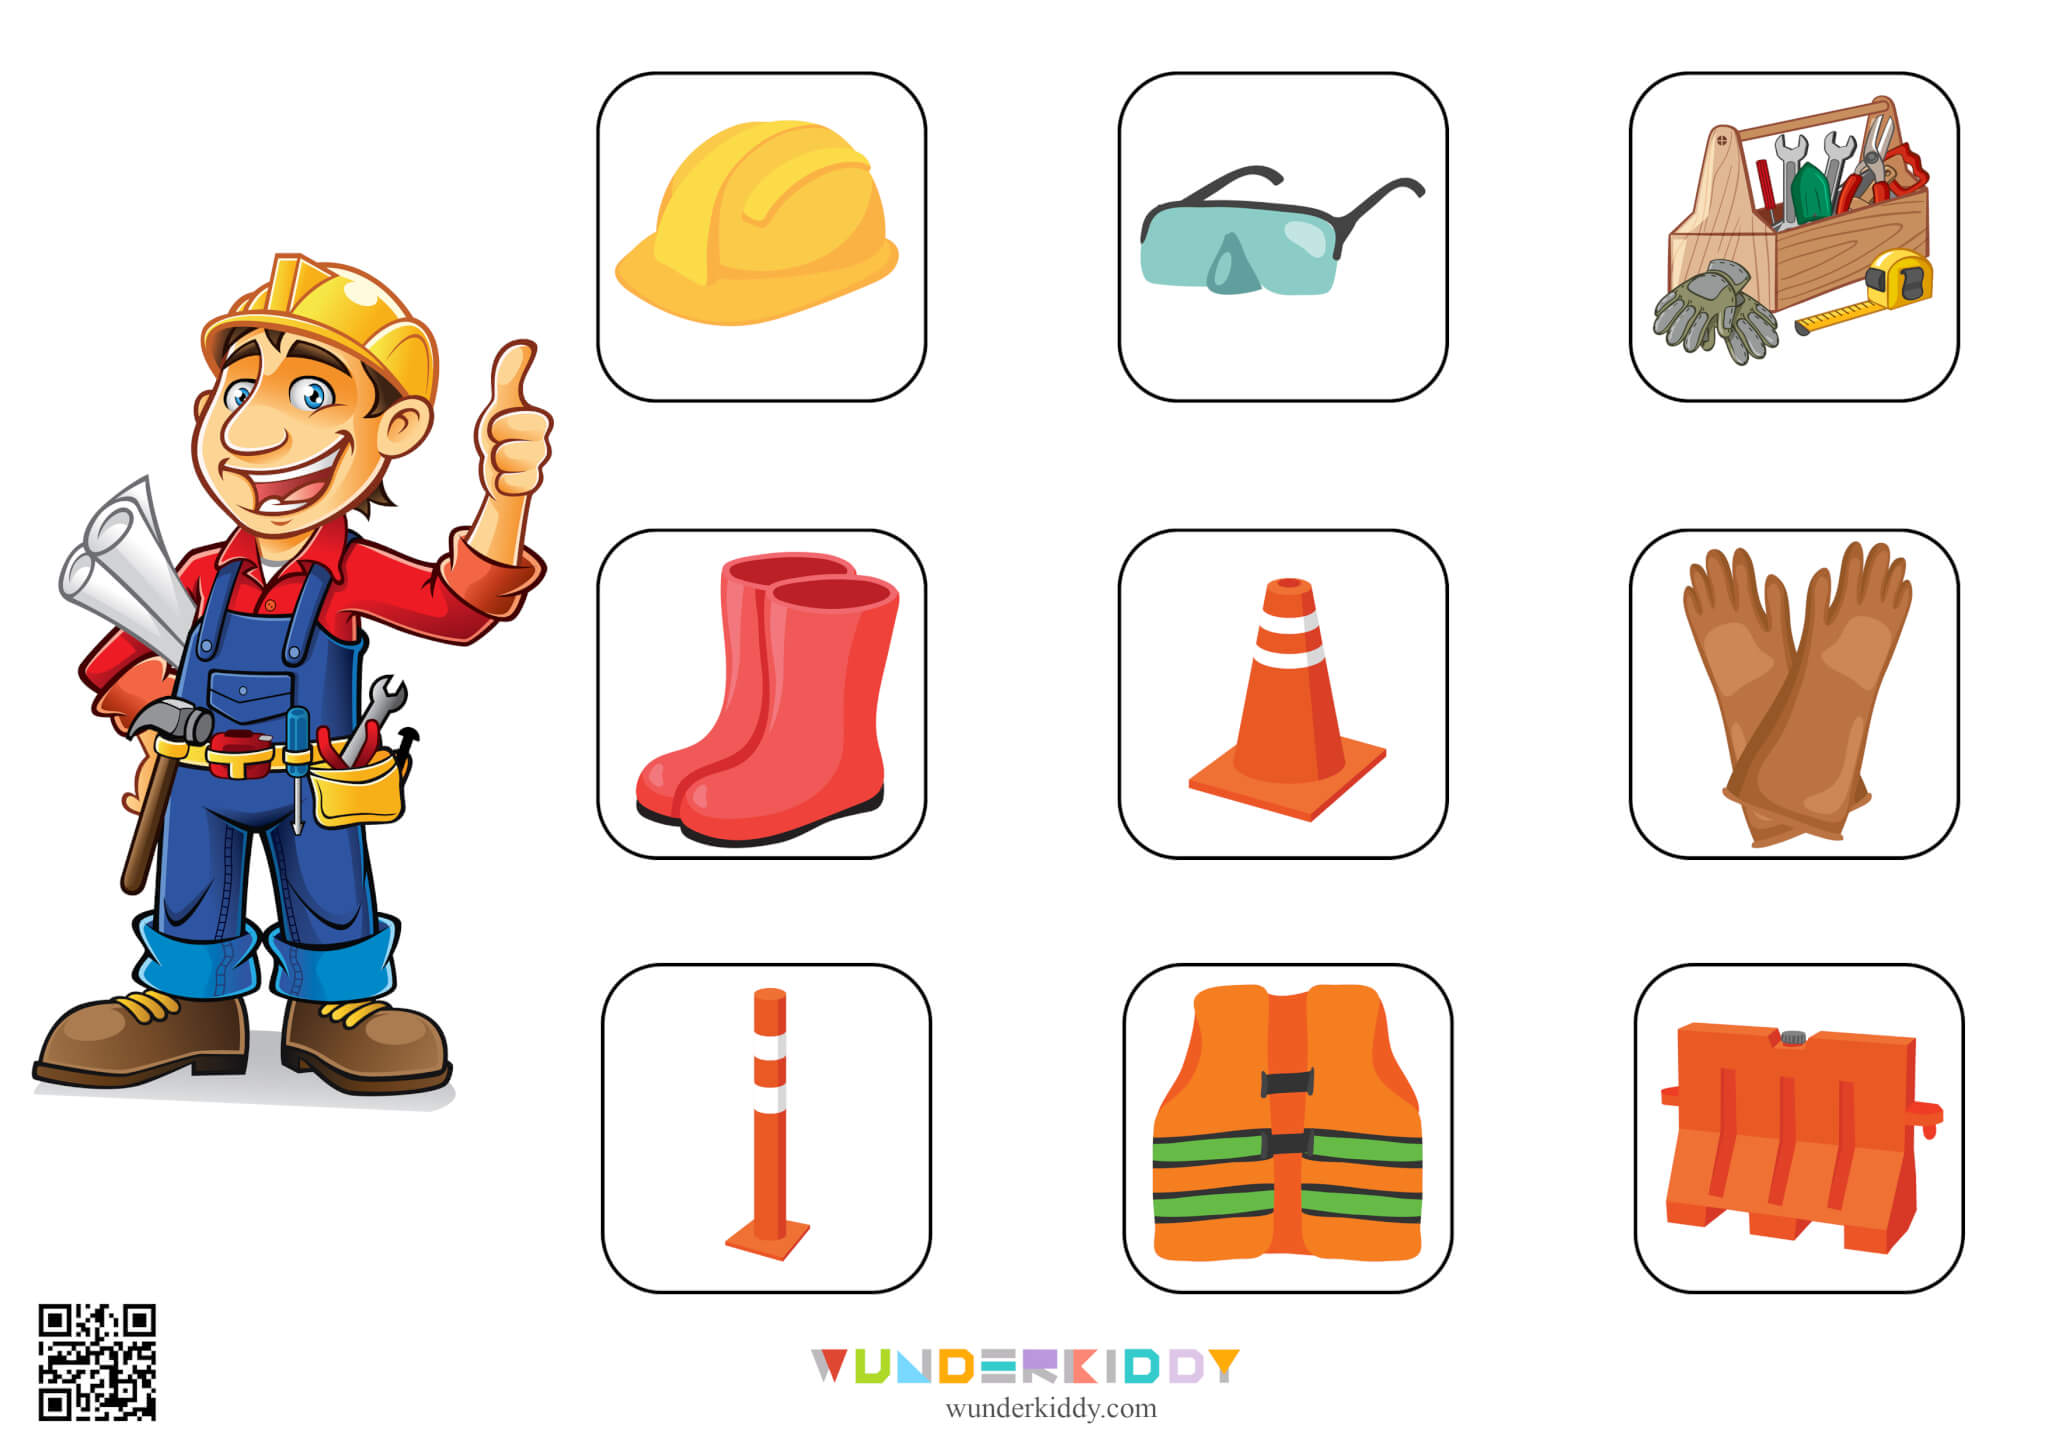 Sorting Worksheet Professions and Tools - Image 8